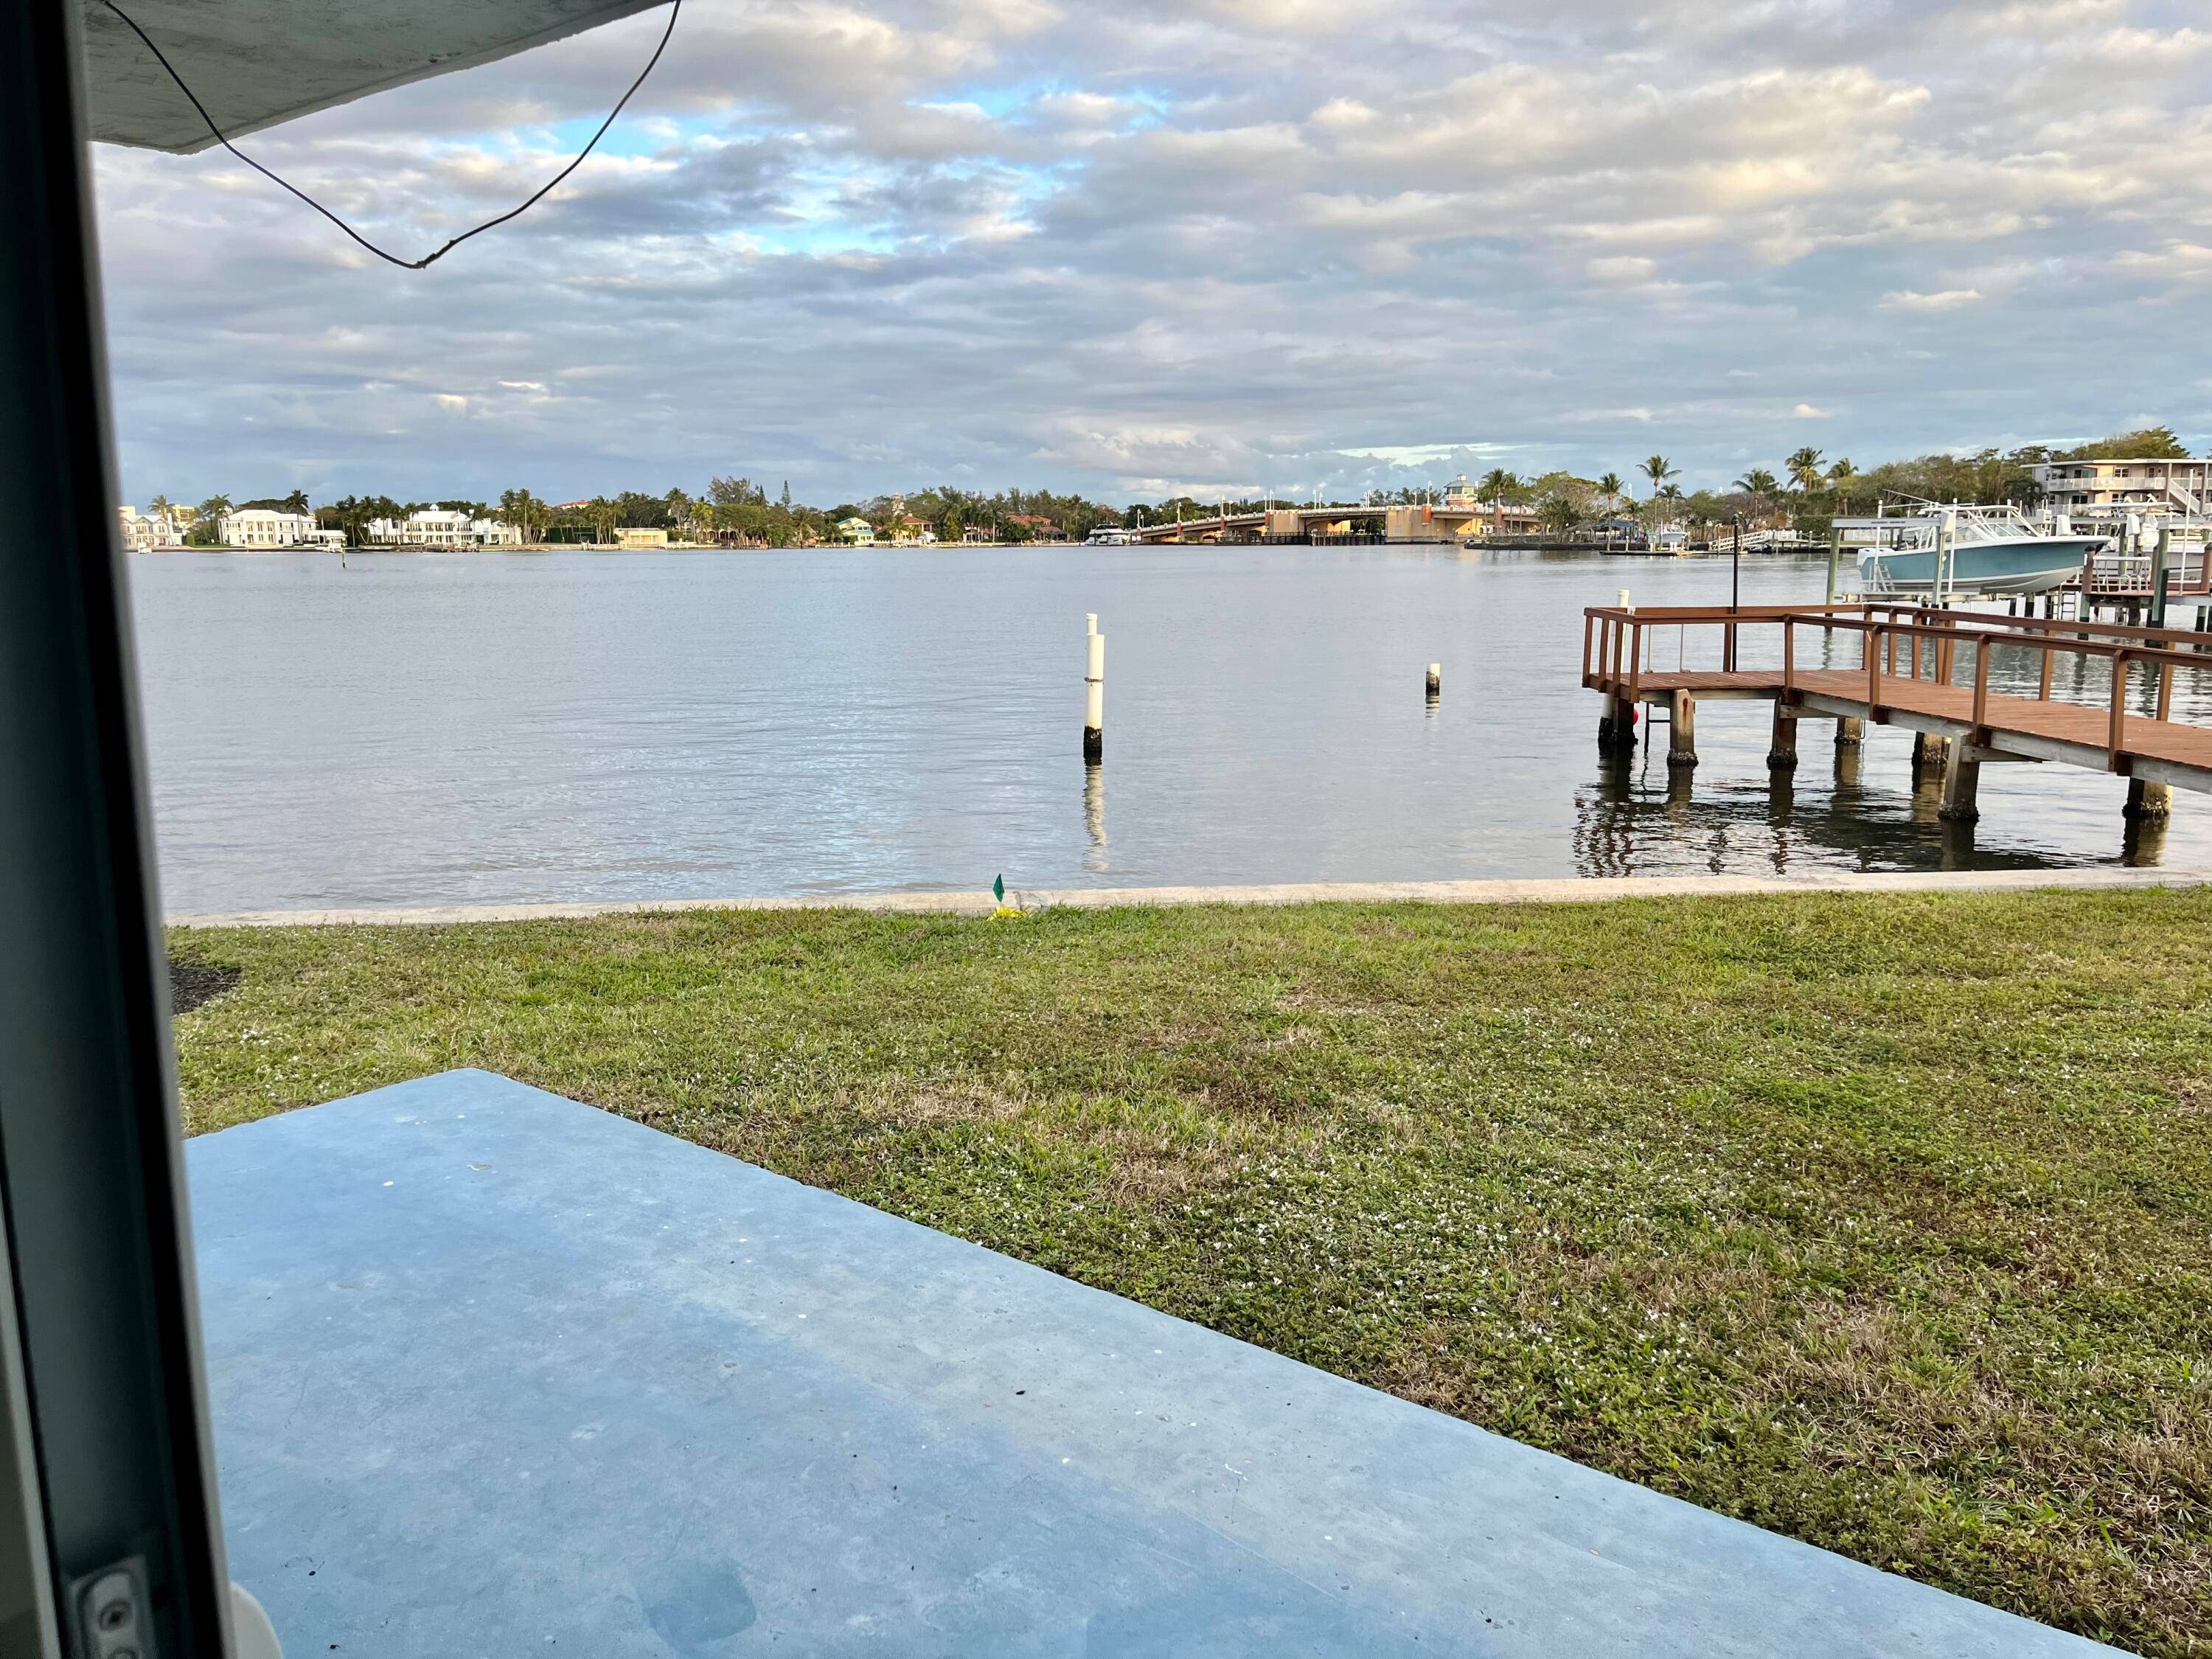 Modern waterfront condo bottom floor unit one of a kind opportunity to live right on the Intracoastal with an amazing view.